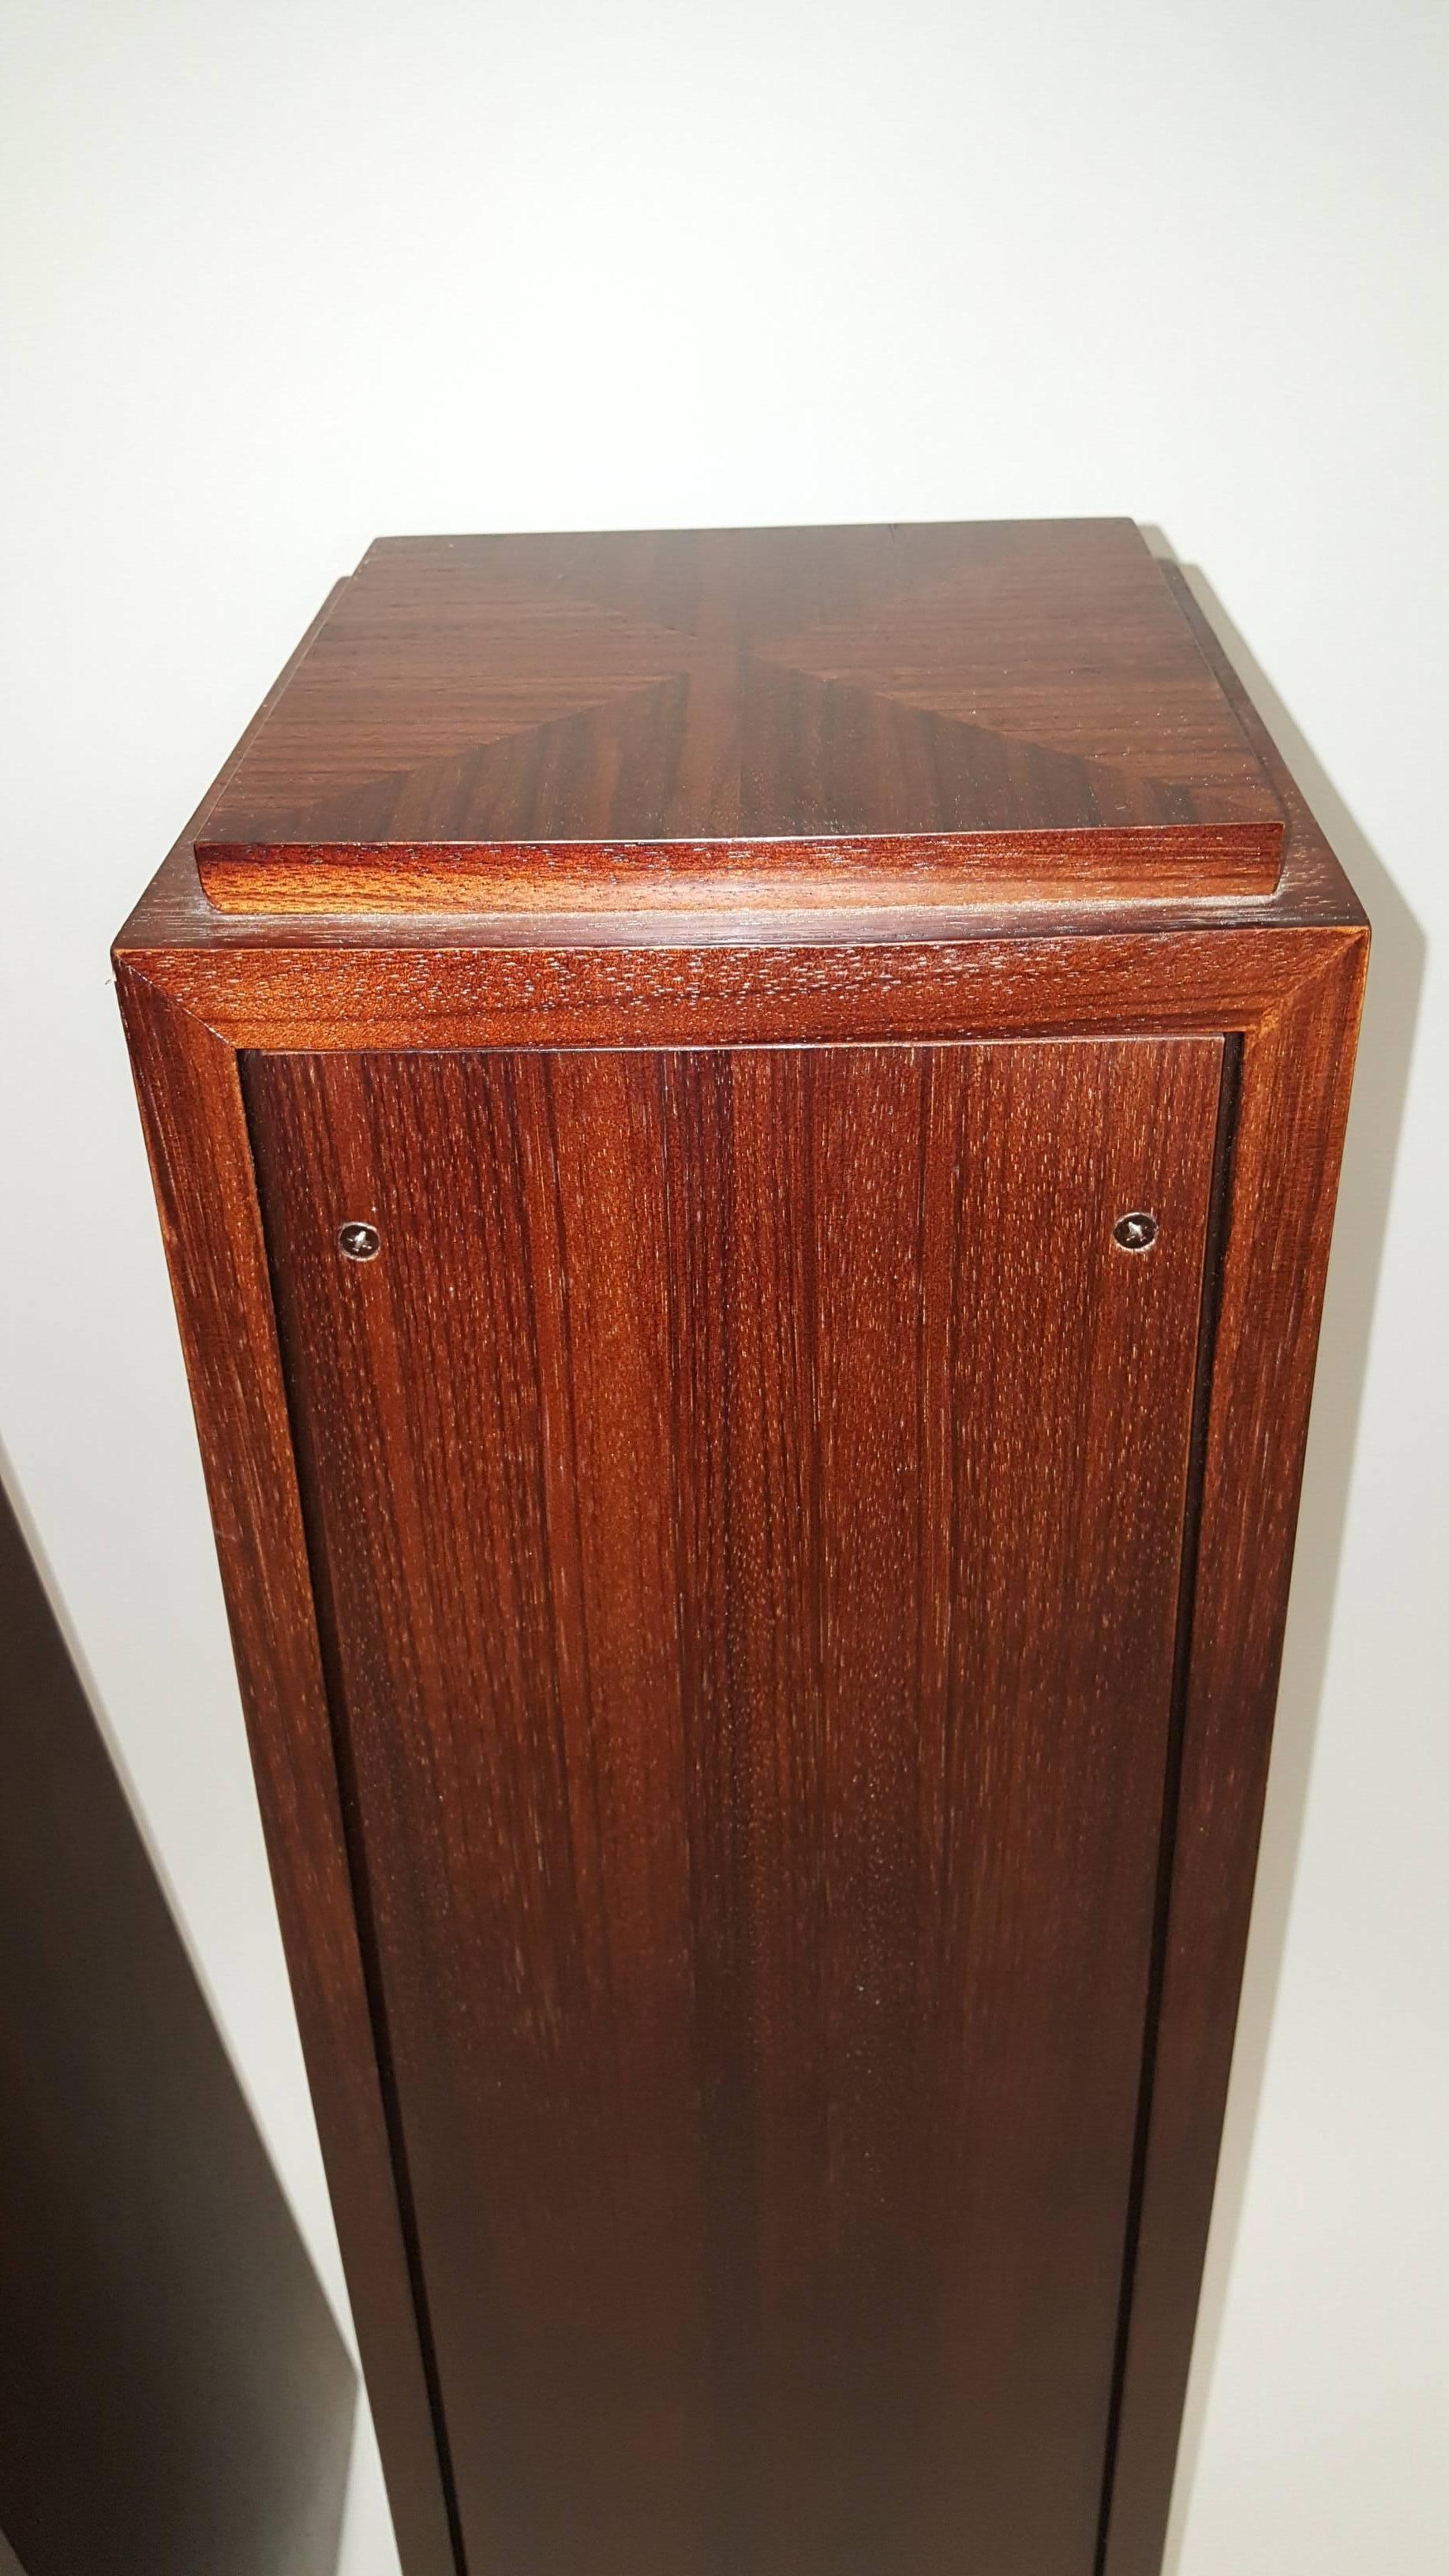 Beautiful pair of rosewood pedestals with great wood grains, the back screws off for storage space. Perfect for small sculpture.